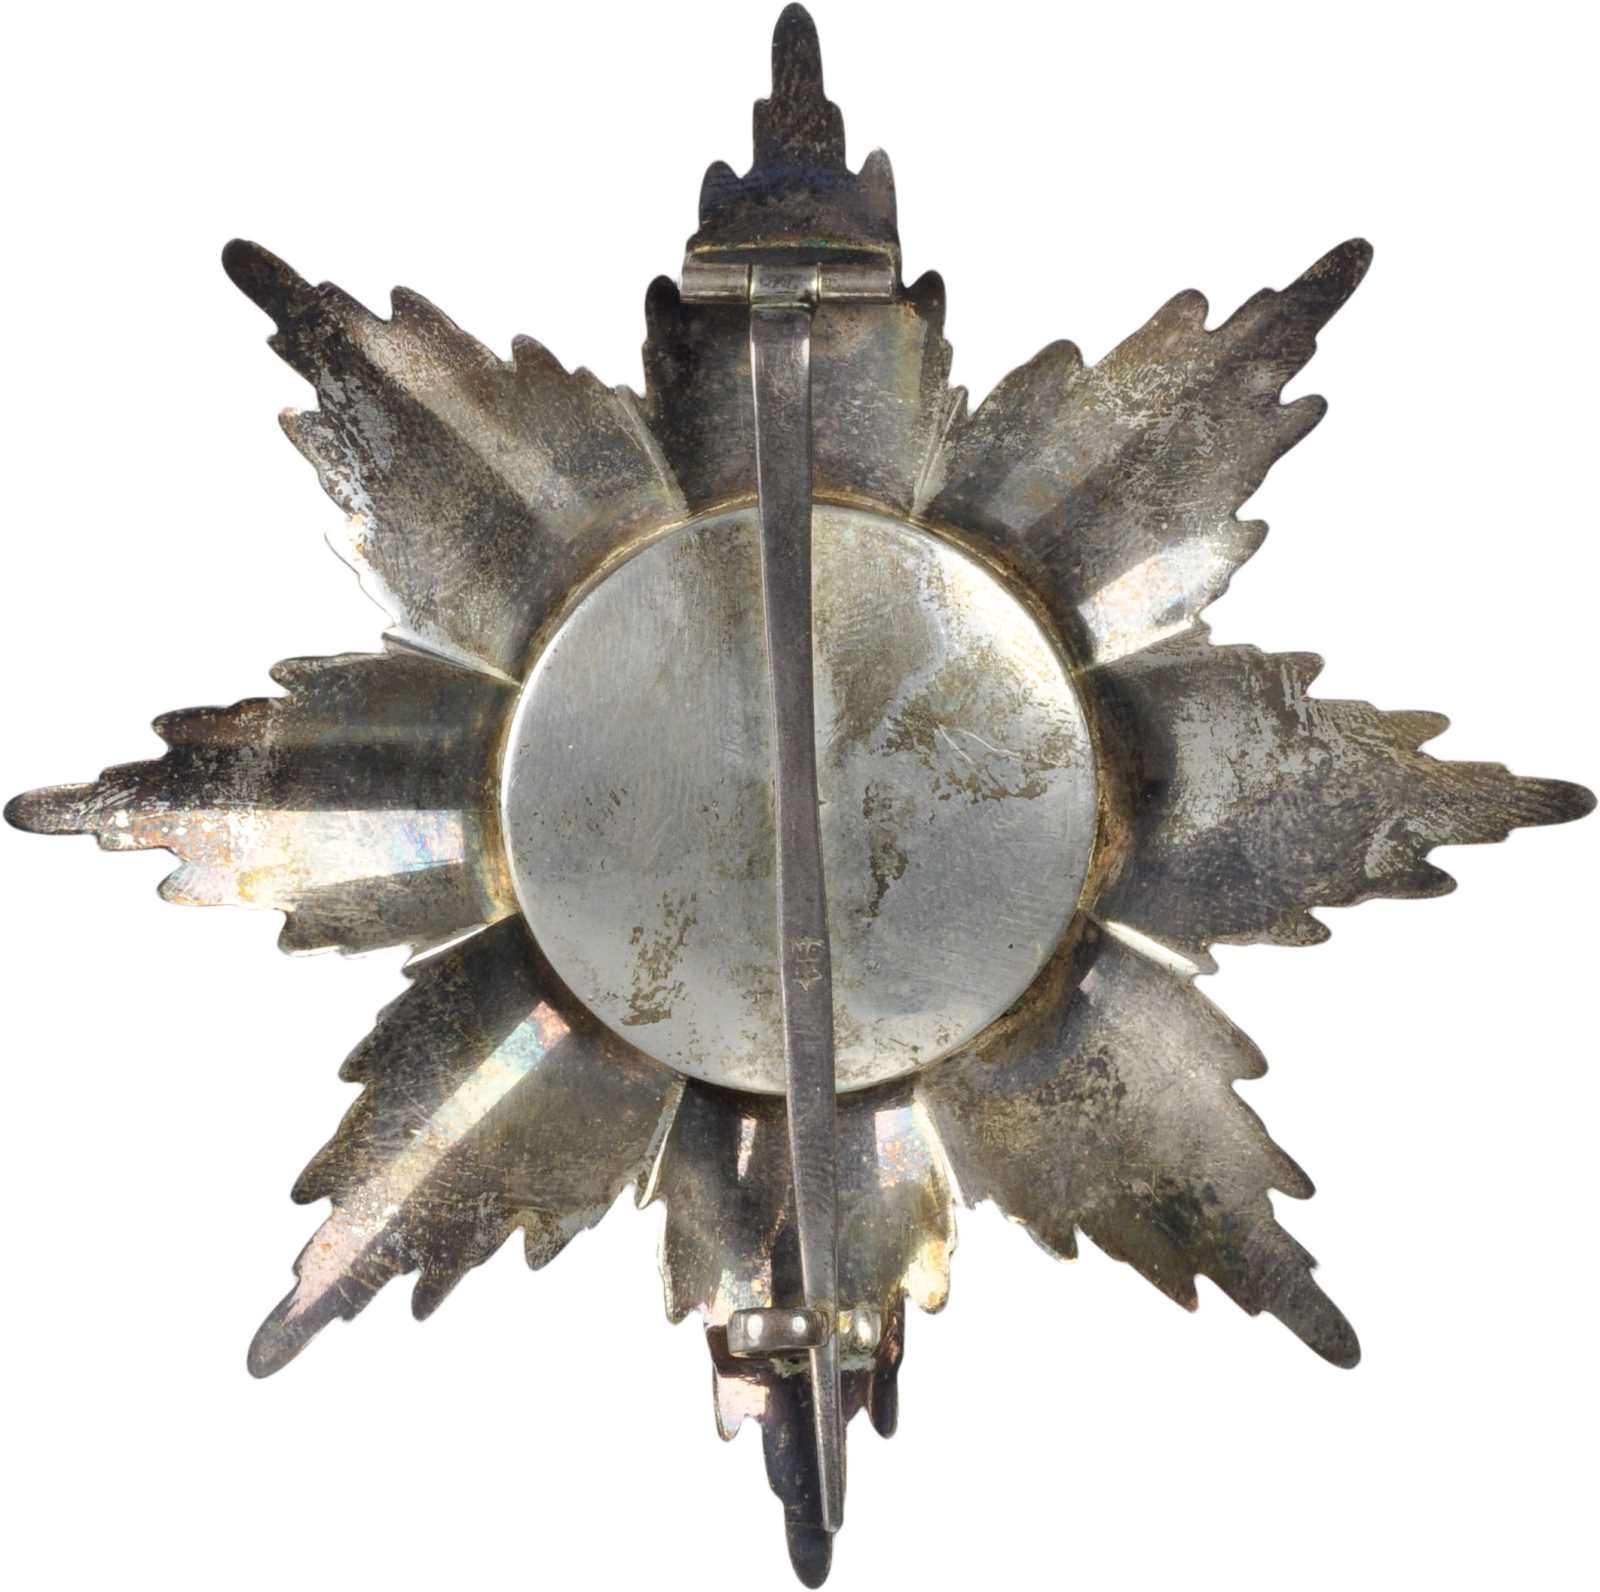 Order of Double Dragon breast star made by William Gibson and John Langman.jpg